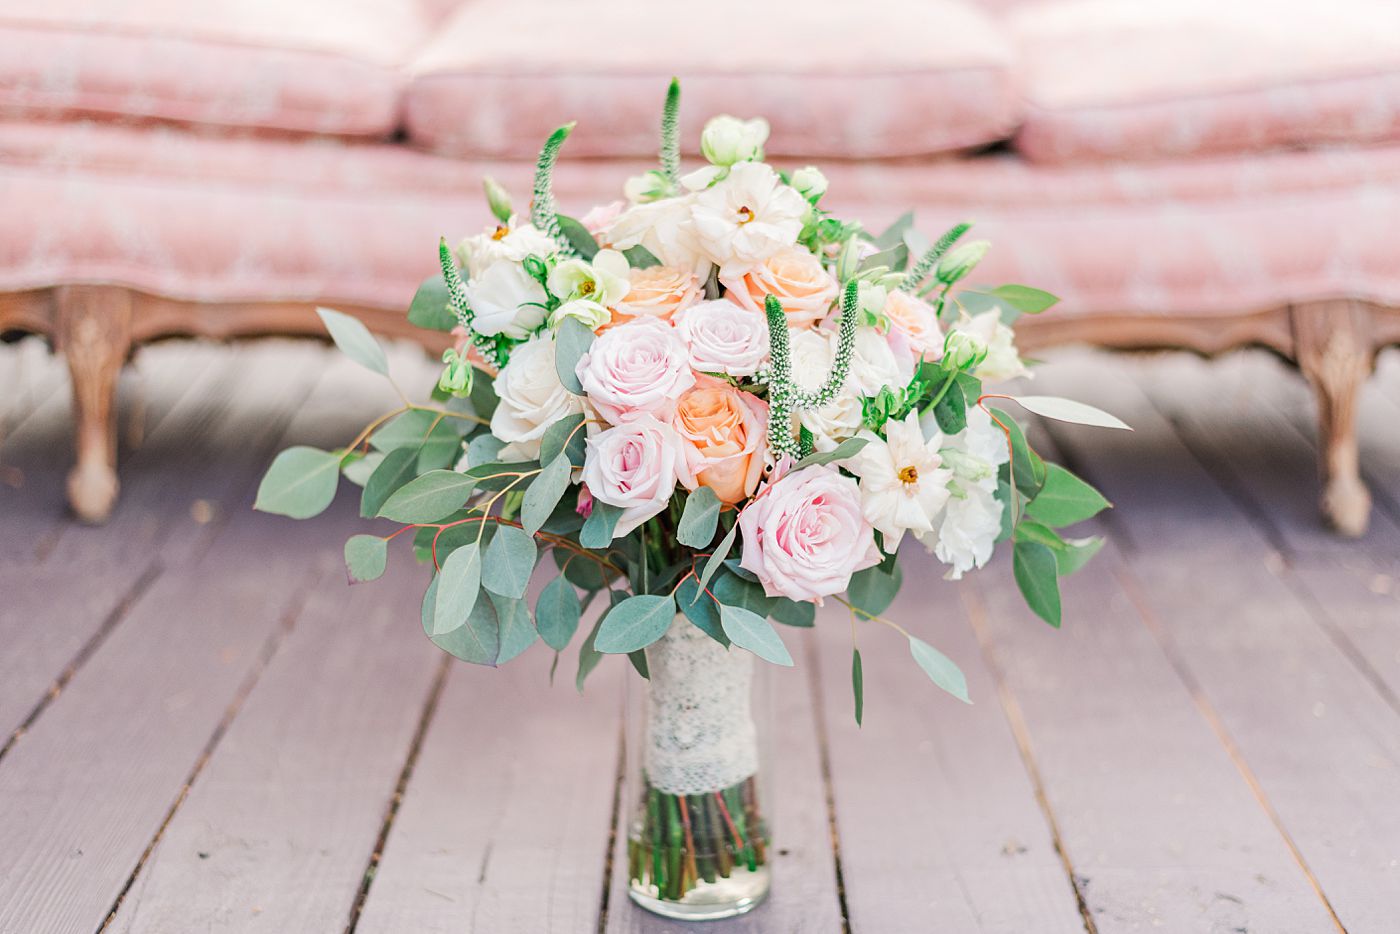 a bouquet of pink and white roses in a vase